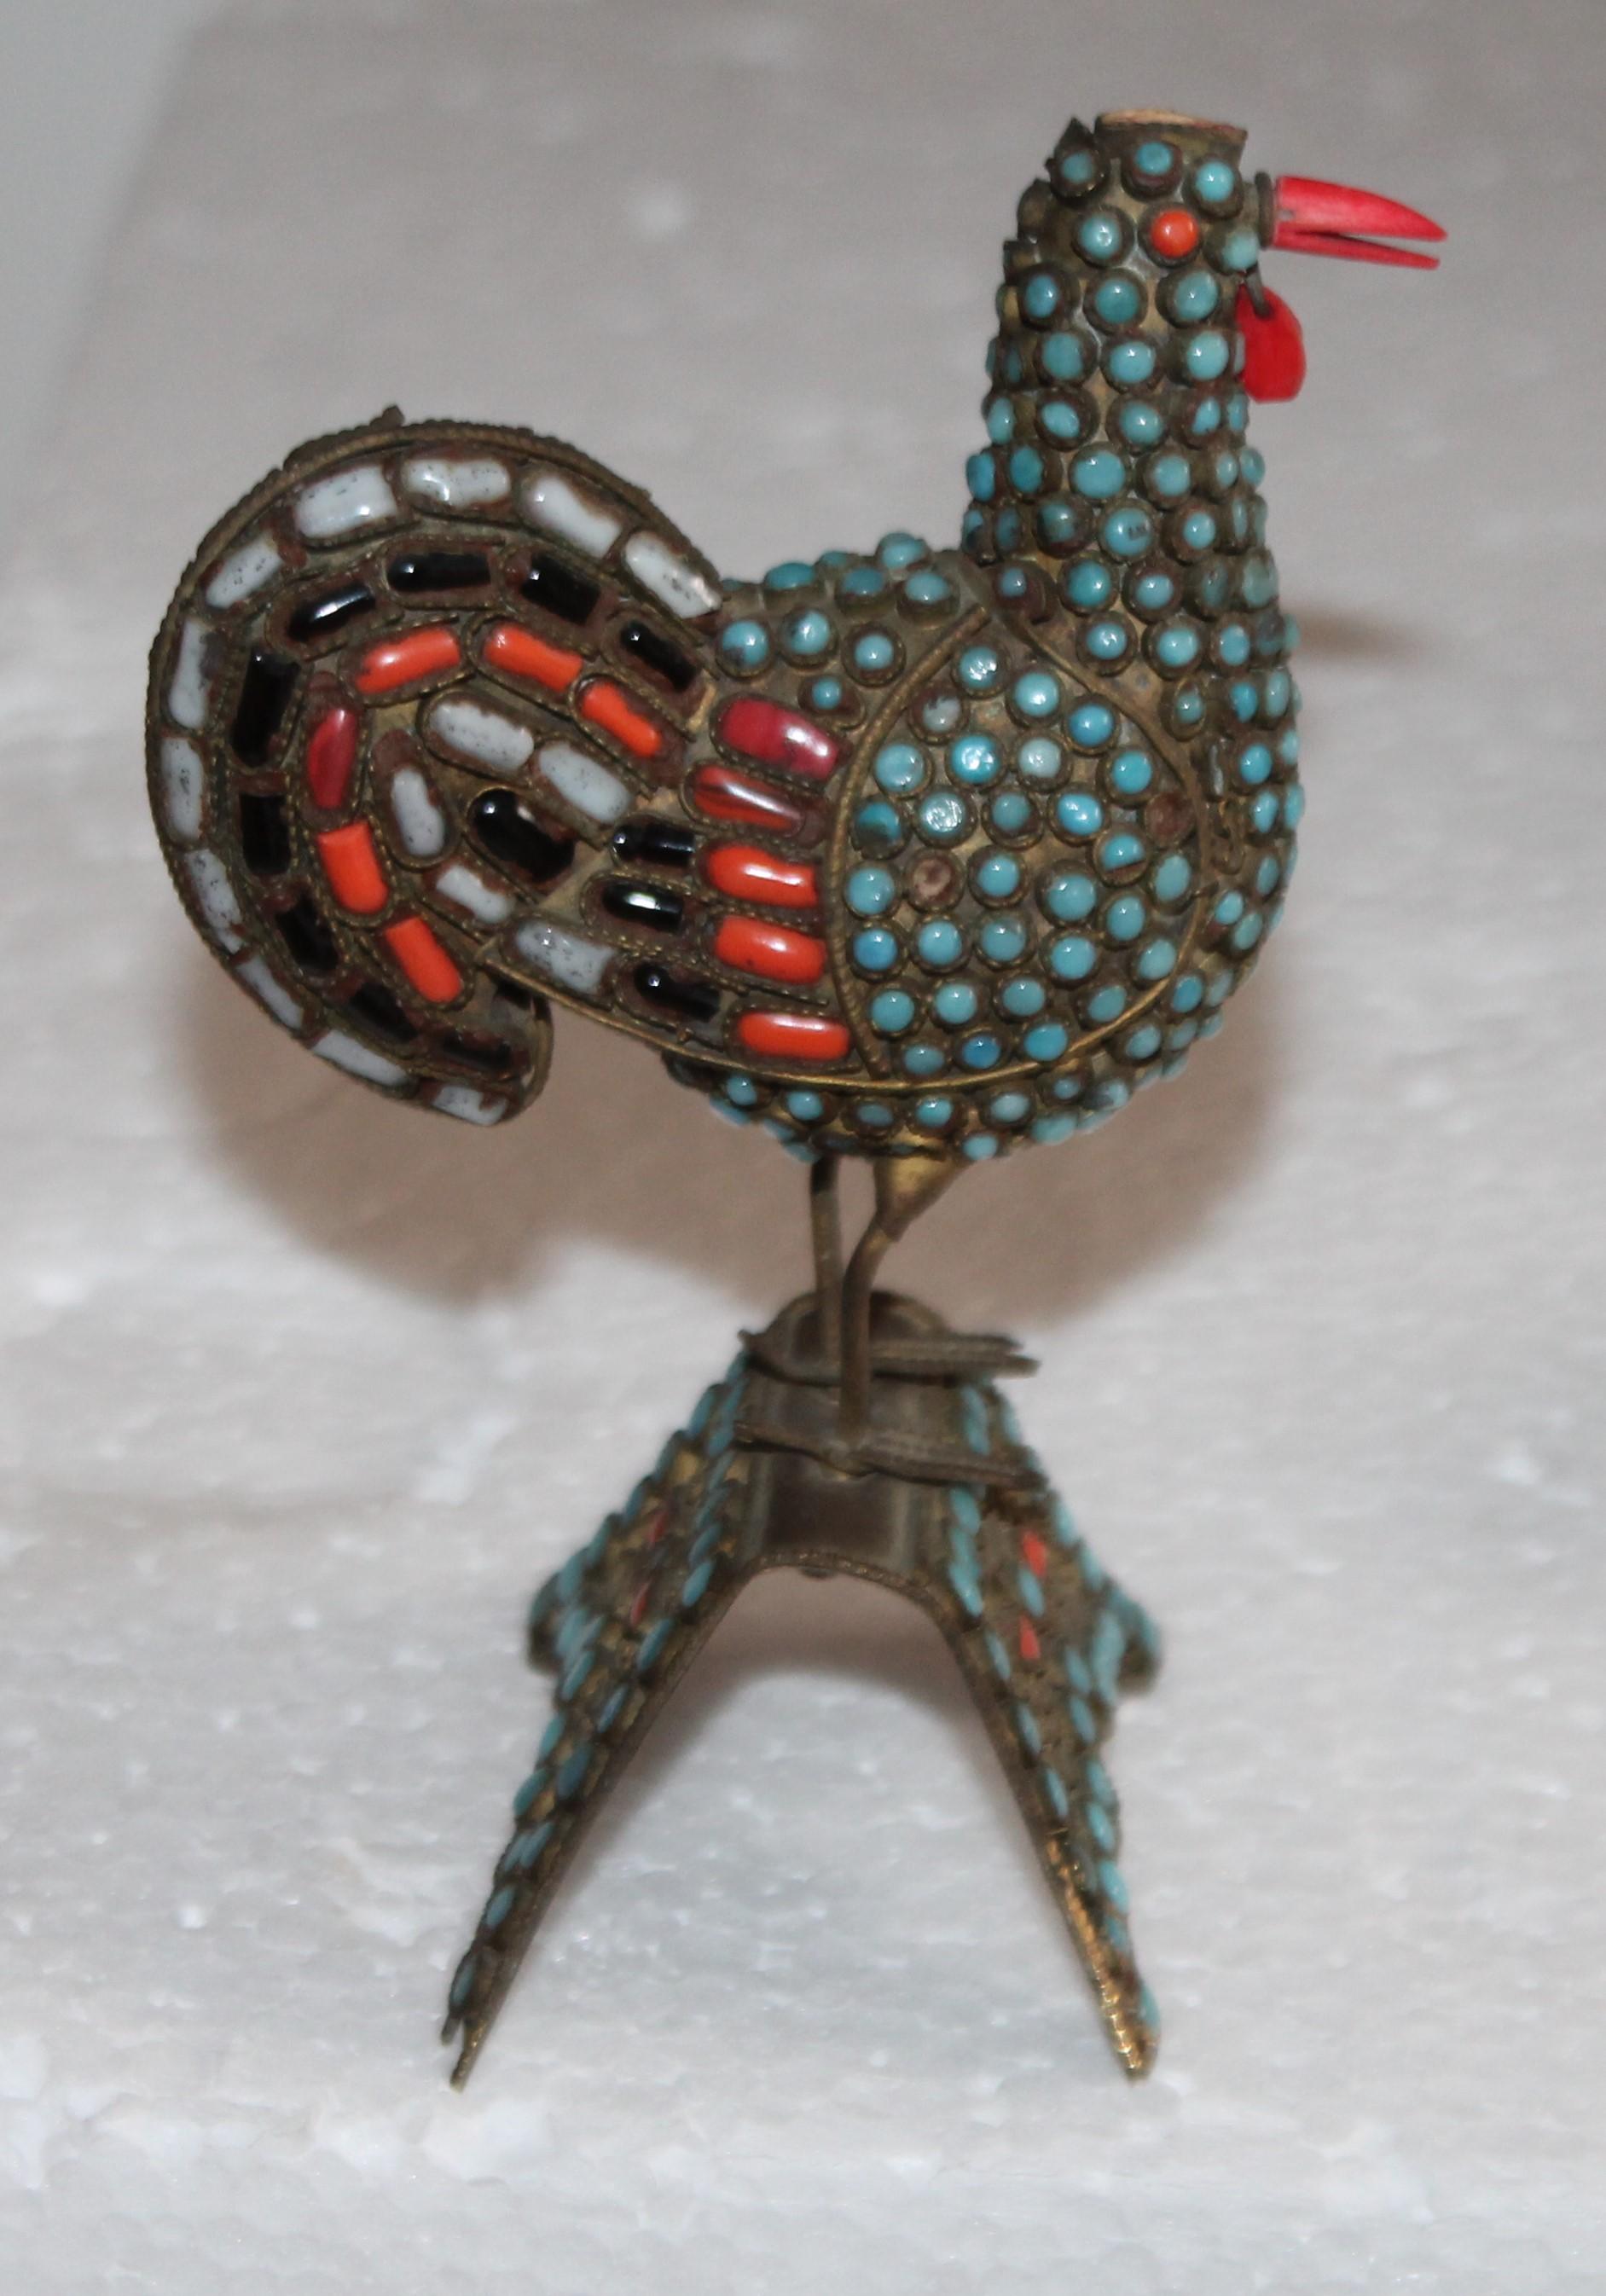 This handmade brass bird has inlaid coral and turquoise with small flakes of amethyst and shell. The work details are really amazing. It stands on its own brass inlaid perch or stand.